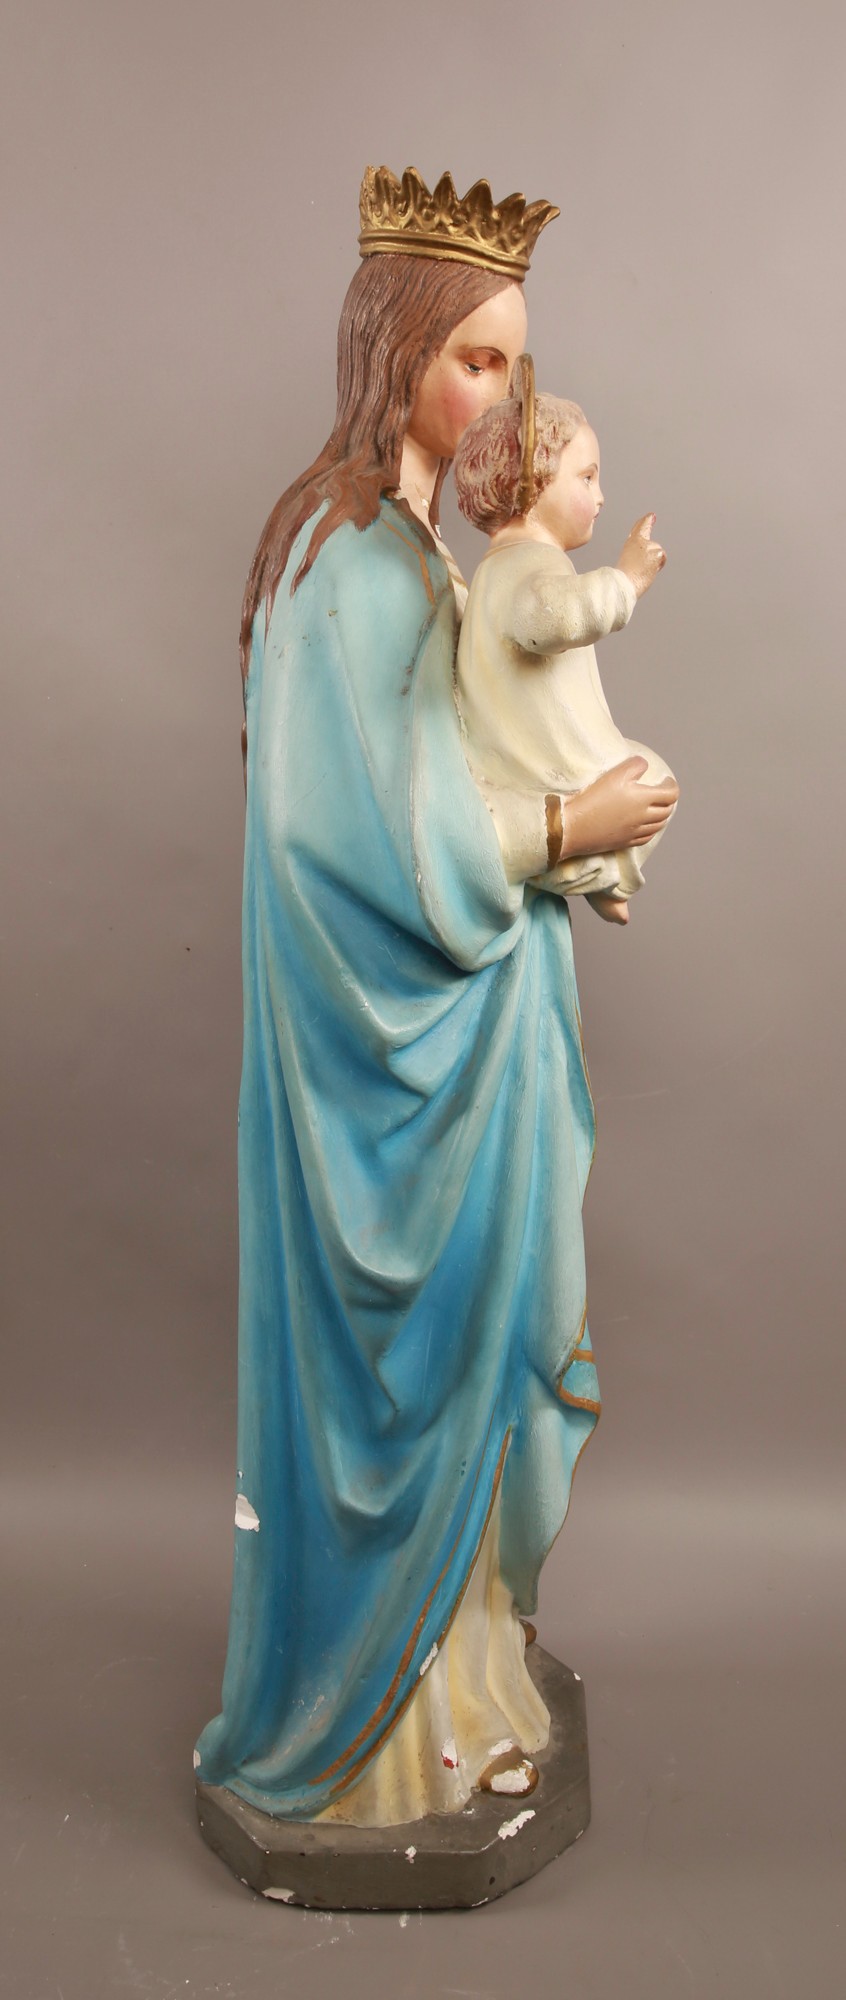 A Large Religious Statue of Mother Mary holding Baby Jesus Early 1900s 106cm Tall #92 - Image 7 of 7